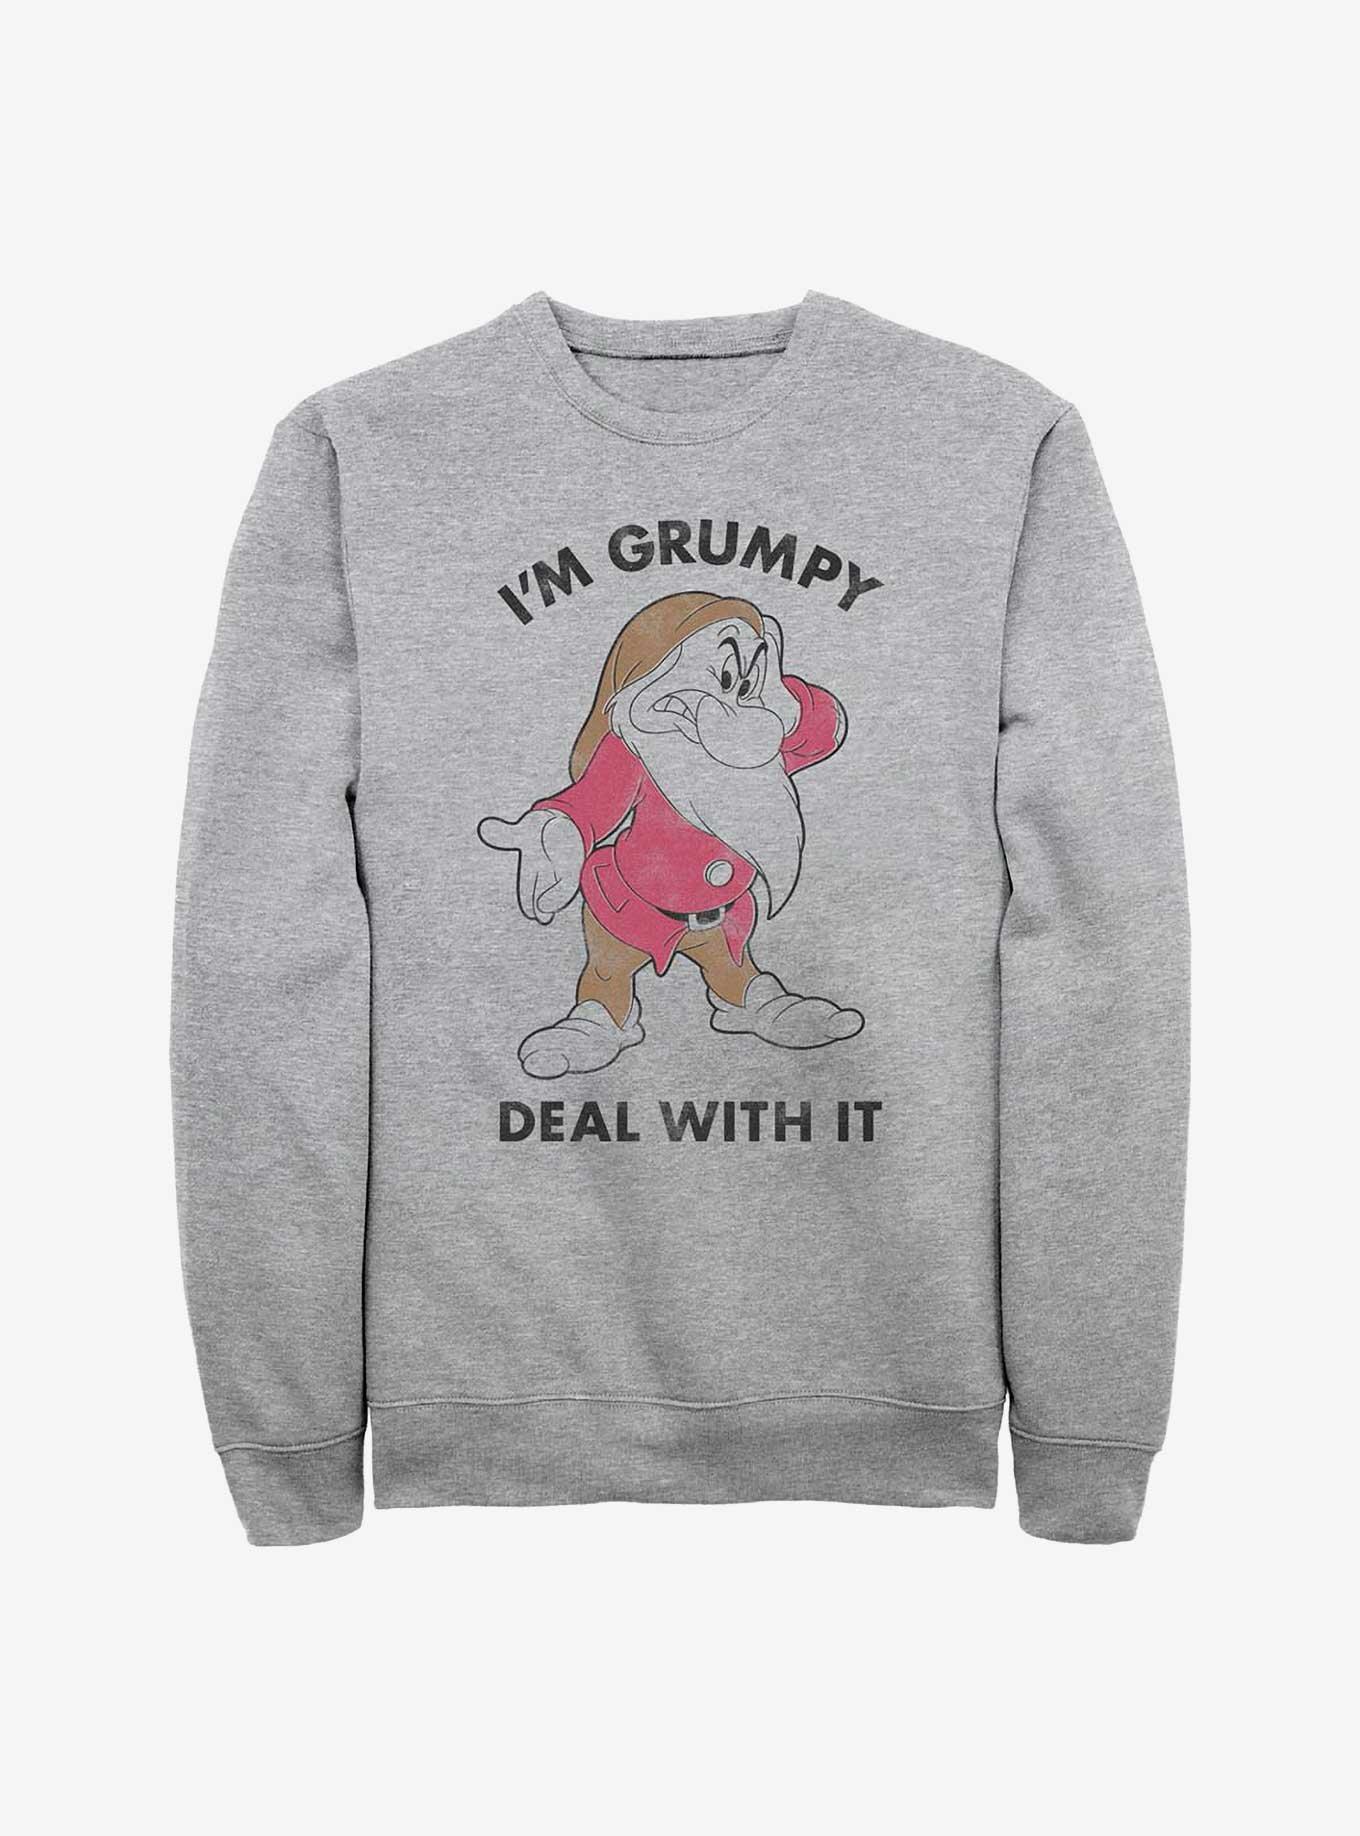 Disney Snow White and the Seven Dwarfs Deal With It Sweatshirt